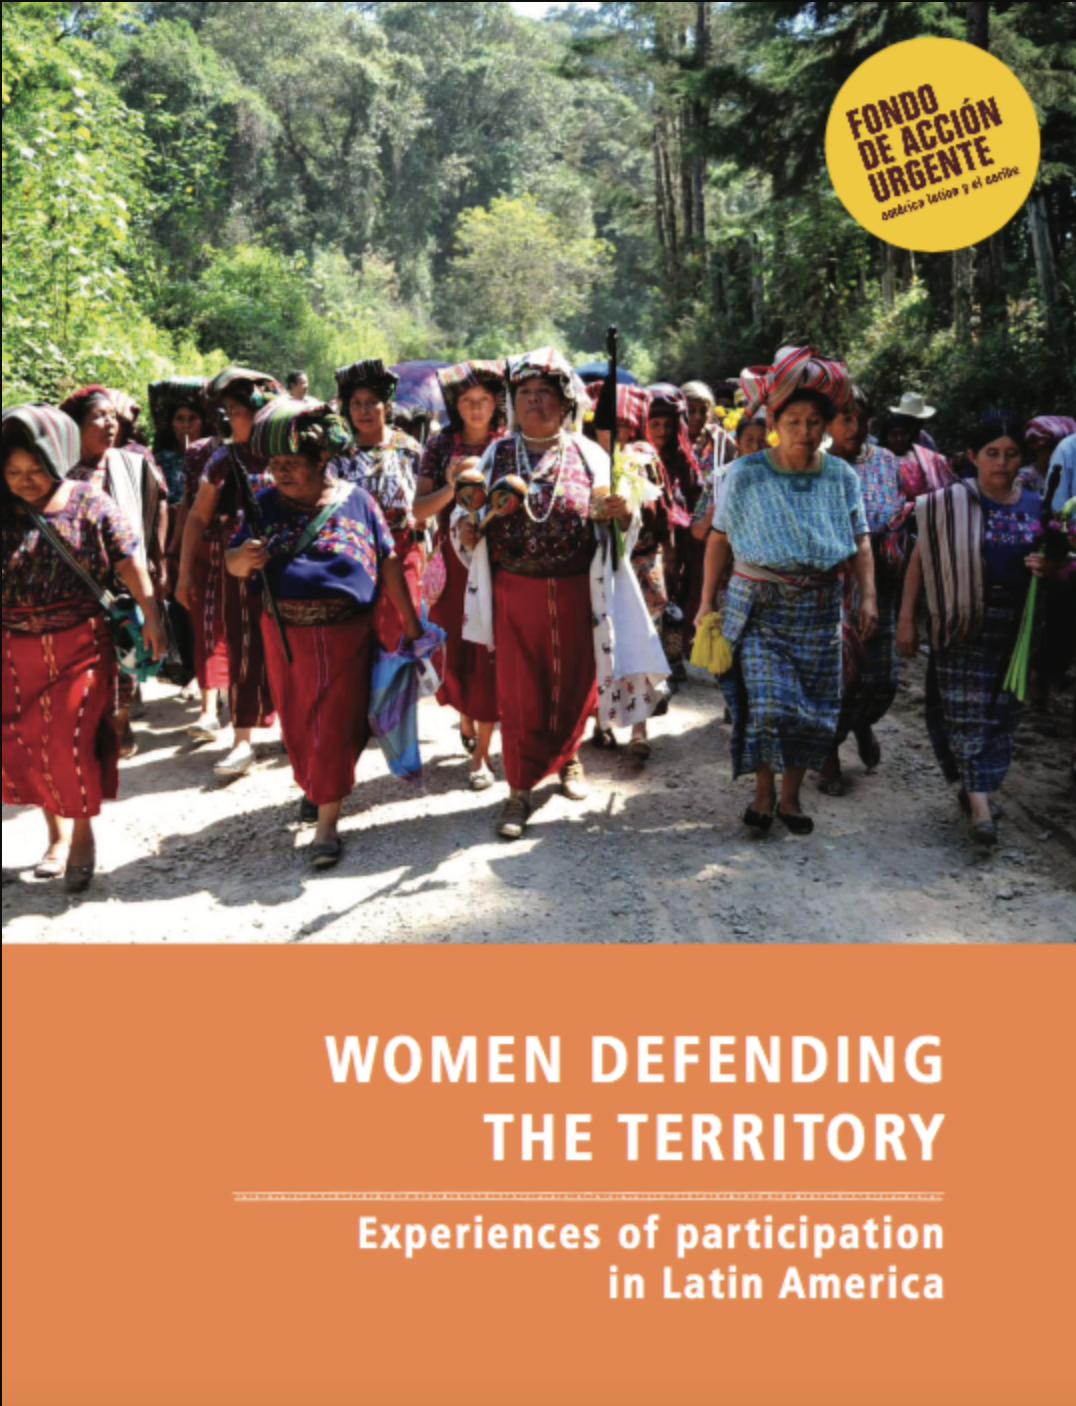 Women defending the territory. Experiences of participation in Latin America